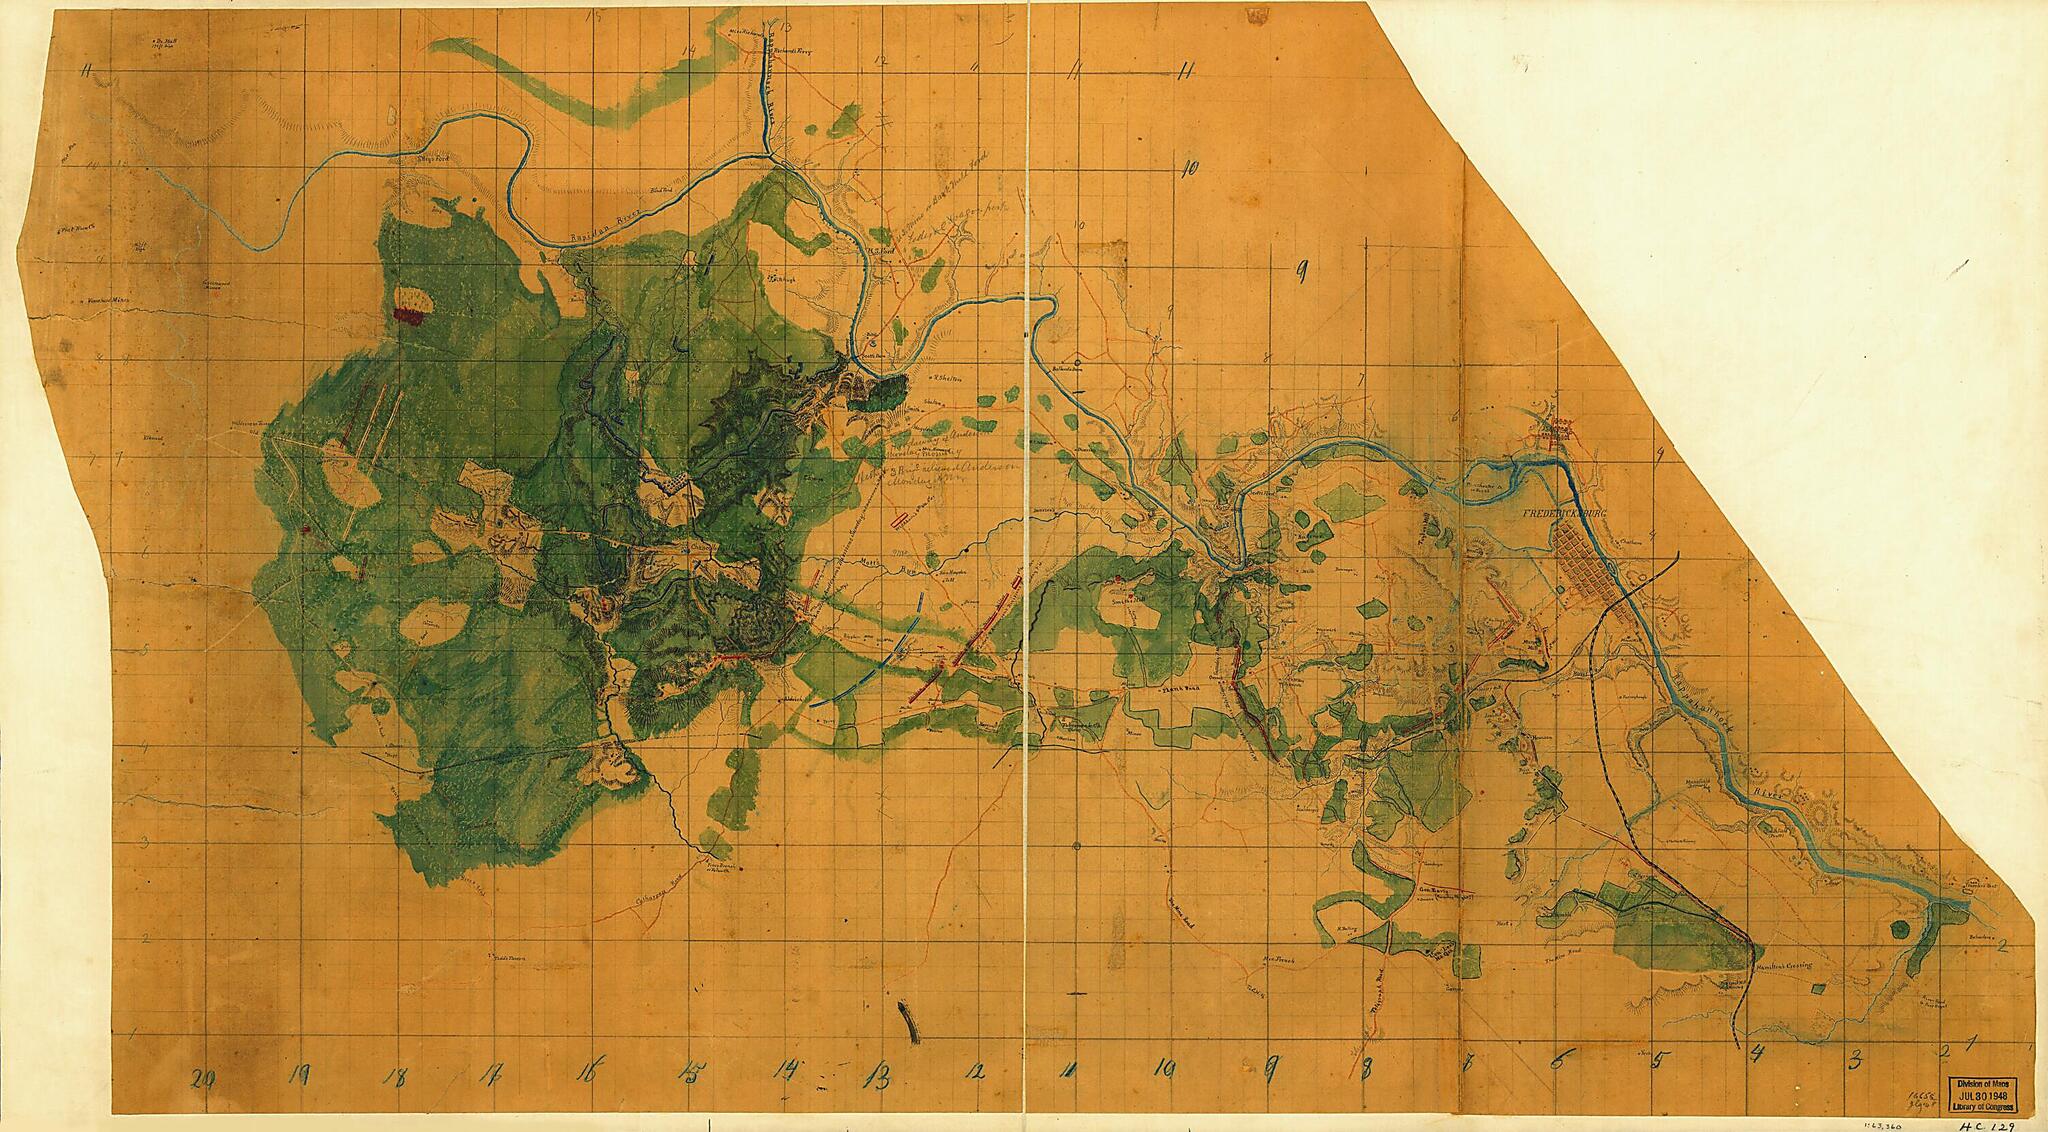 This old map of Sketch of the Battles of Chancellorsville, Salem Church, and Fredericksburg, May 2, 3, and 4, from 1863 was created by Jedediah Hotchkiss in 1863